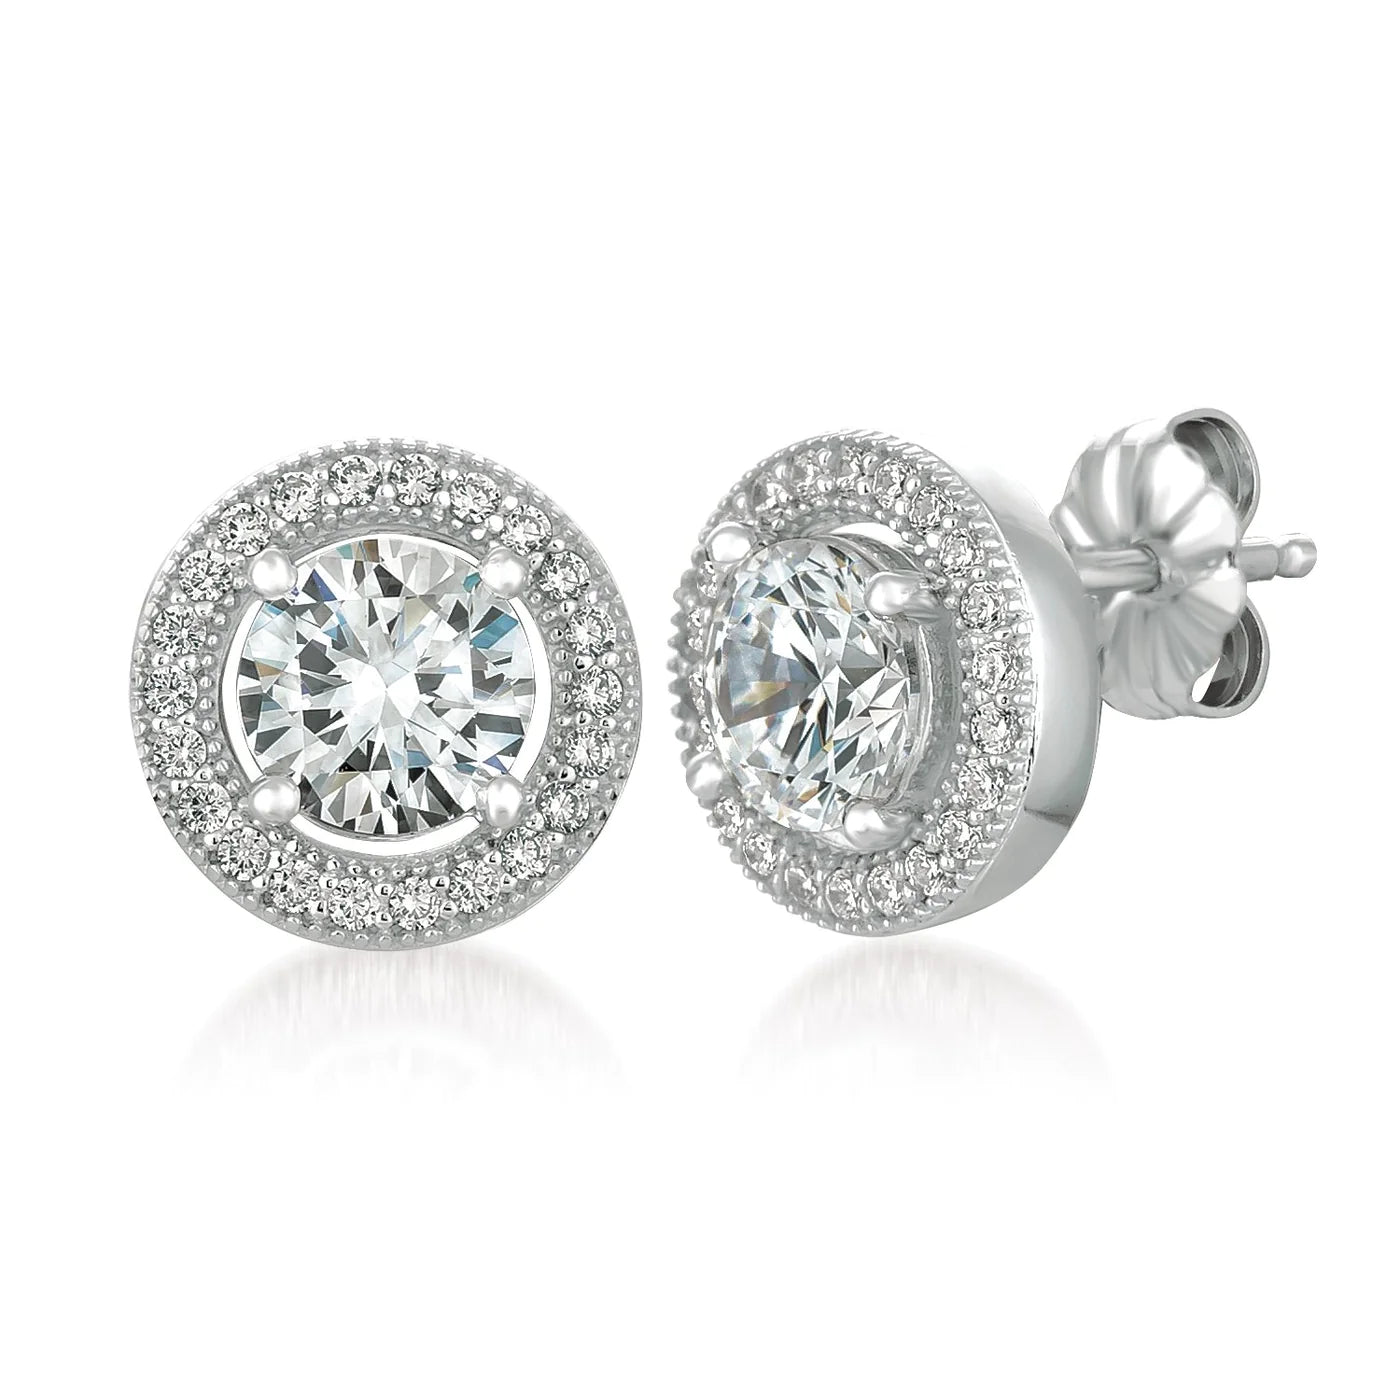 Brilliant Cut Stud Halo Earrings Finished in Pure Platinum